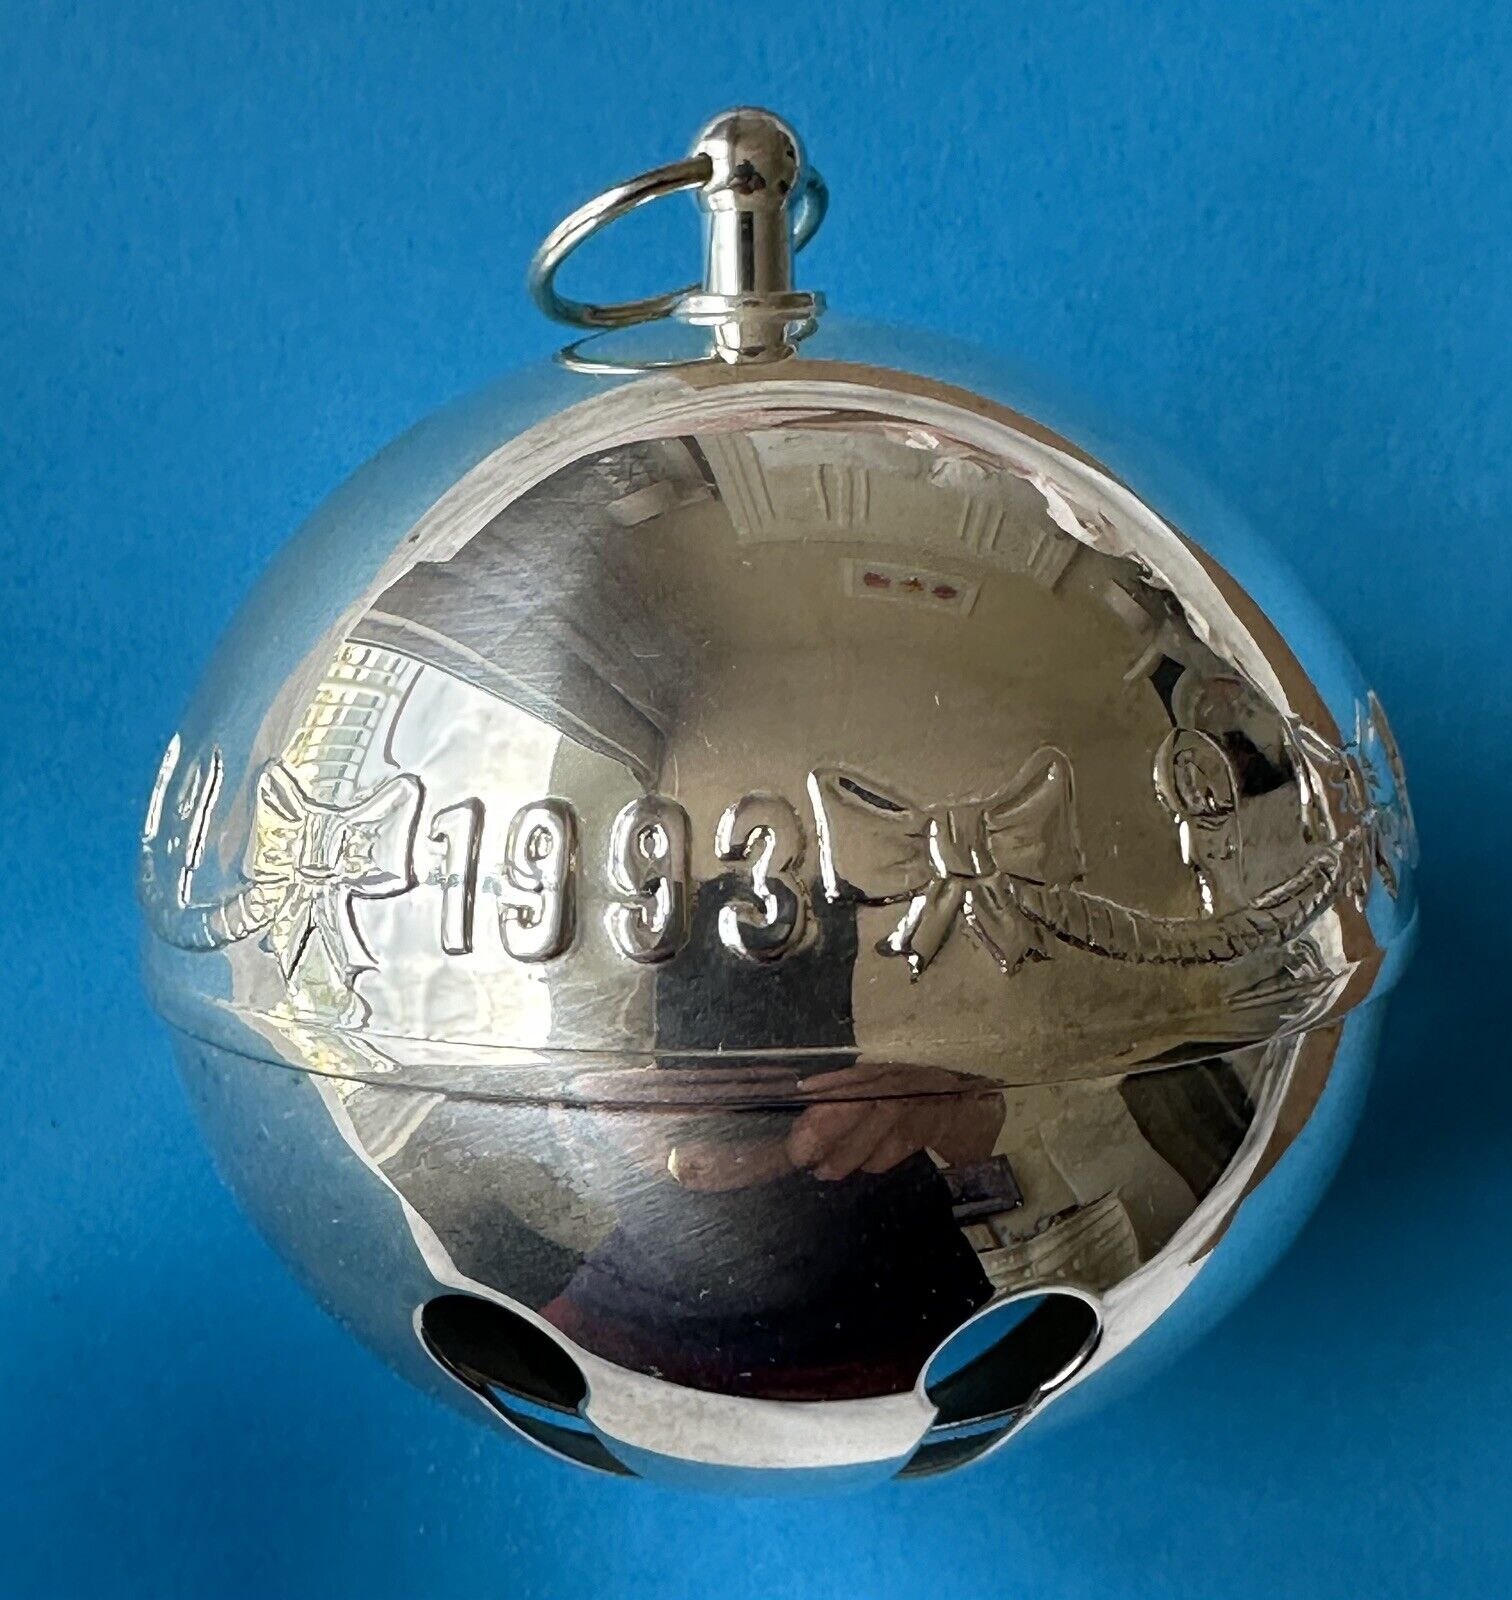 1993 Wallace Silverplate Sleigh Bell Annual Christmas Ornament